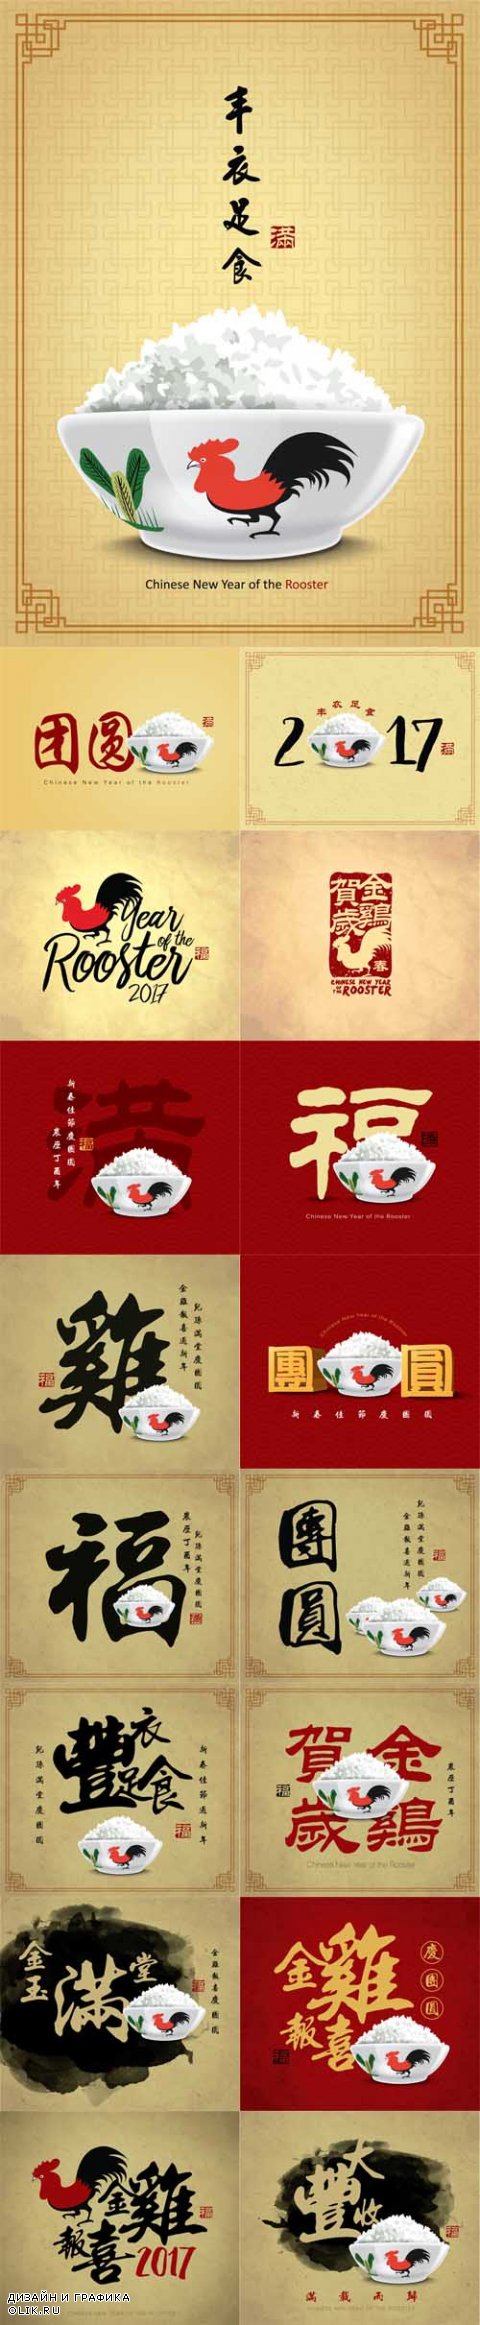 Vector Chinese New Year Card Design with Rooster Bowl, 2017 Year